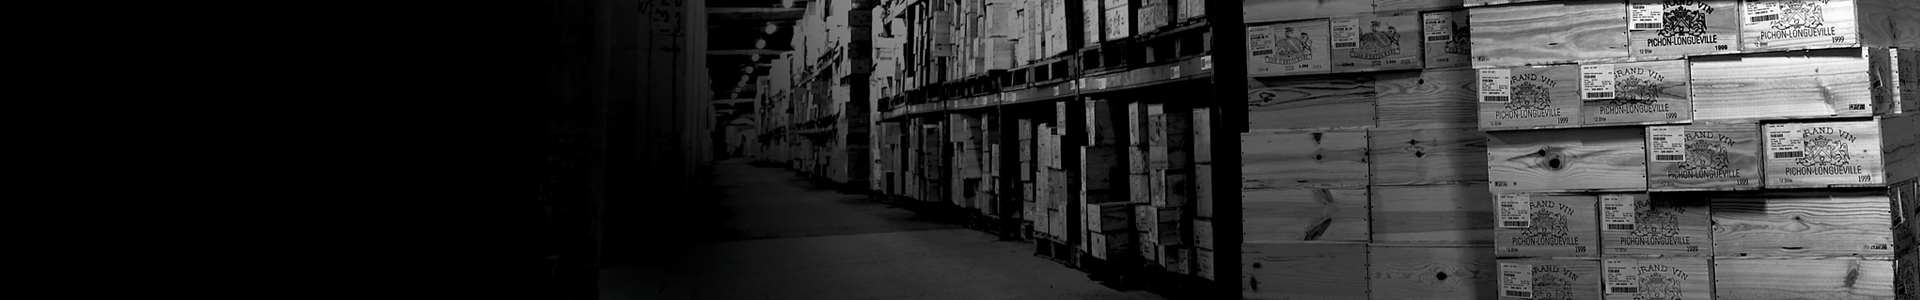 crates stacked